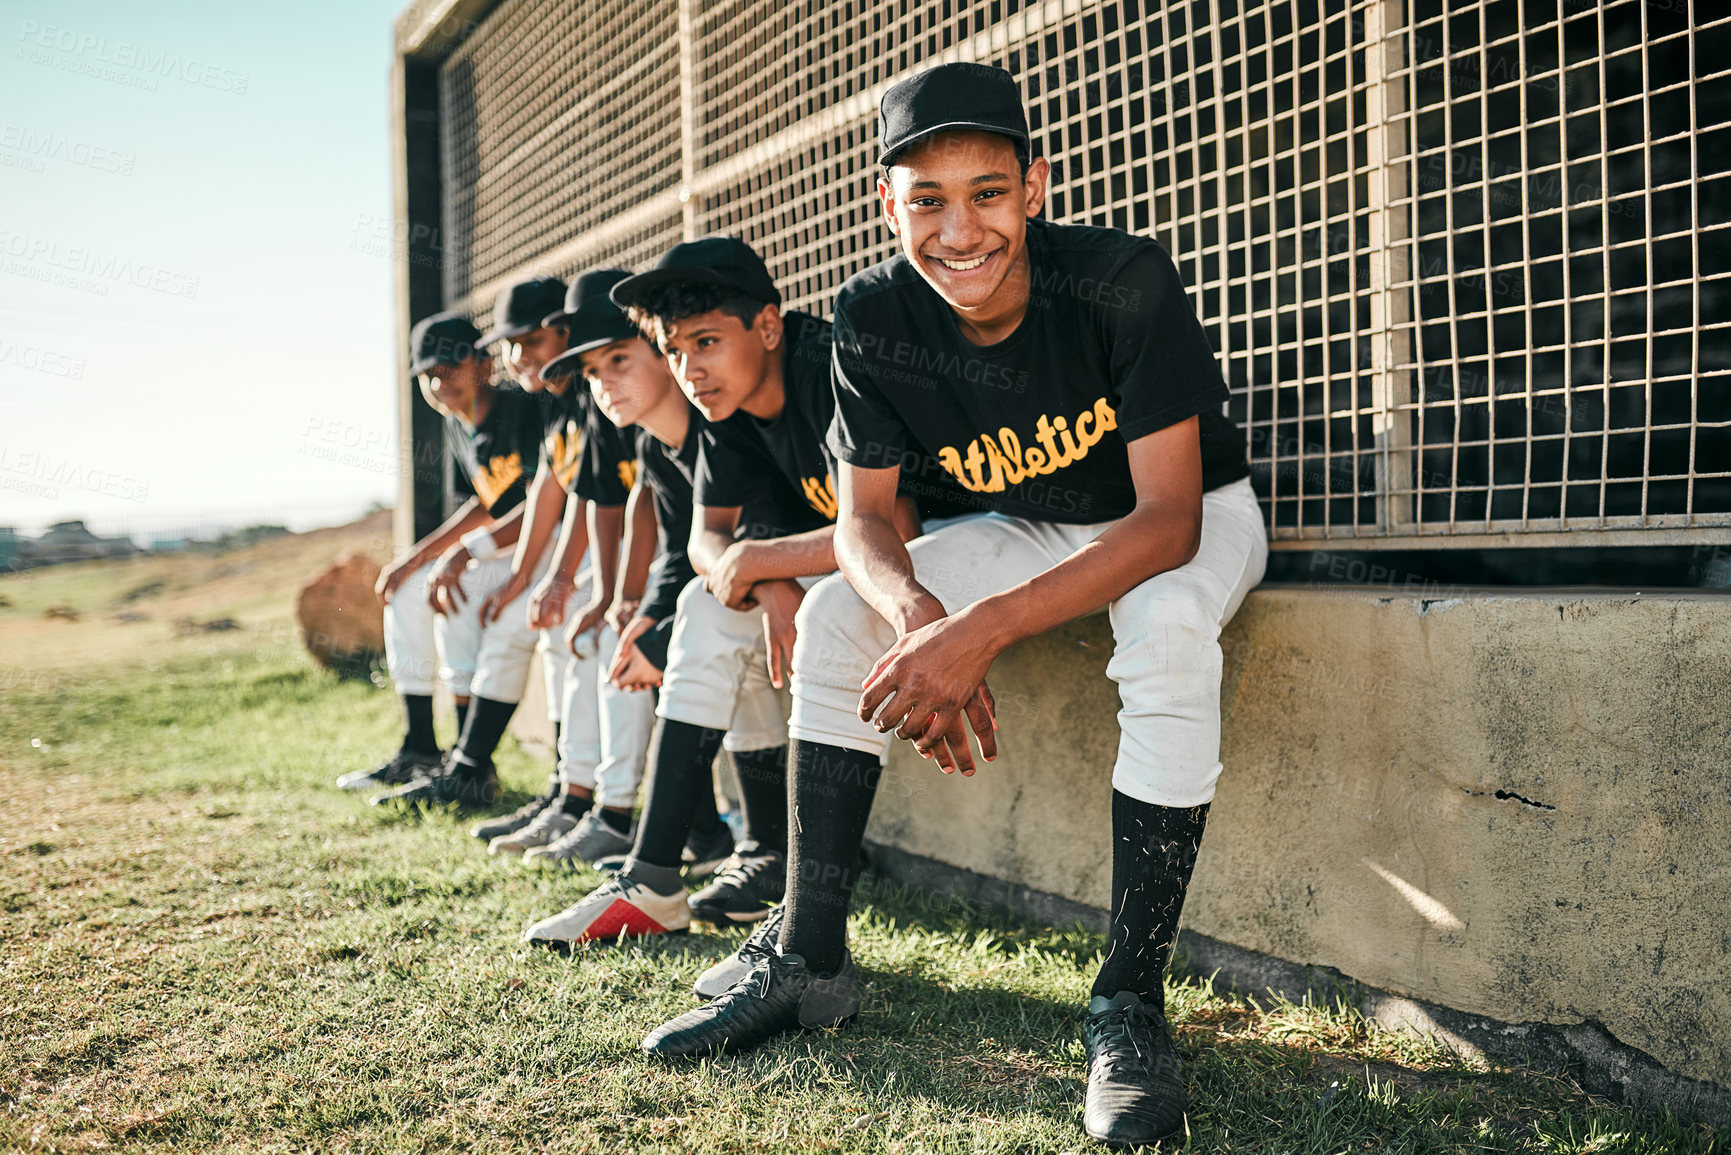 Buy stock photo Shot of a group of baseball players sitting together on a field